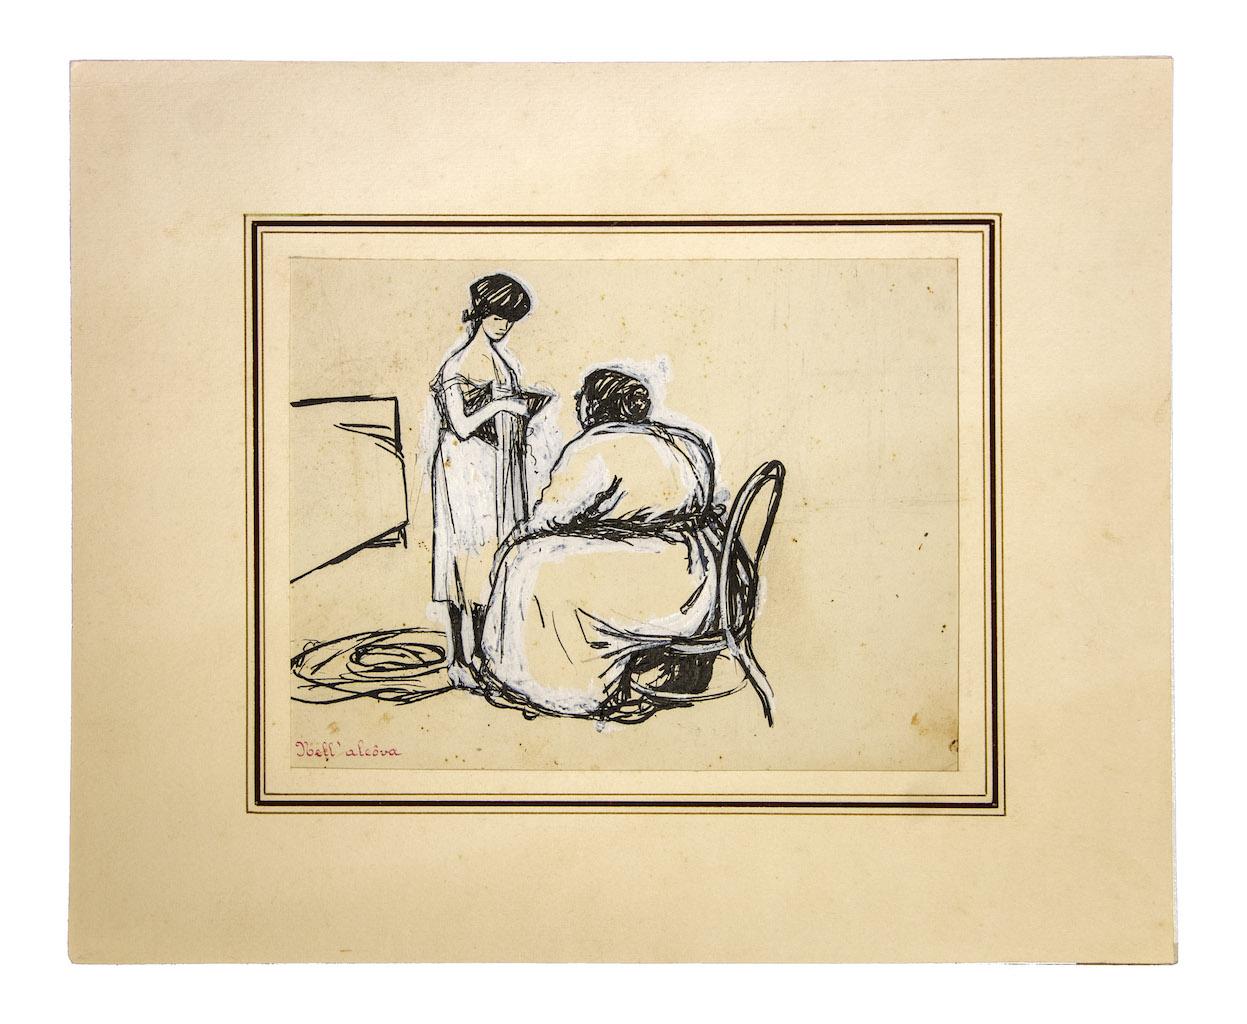 Nell'alcova is an original drawing in mixed media, ink, pencil and white lead on cardboard ,realized in 1902 ca. by Gabriele Galantara (1865-1937).

In good conditions except for some diffused foxings and a small hole on the lower left

Passepartout